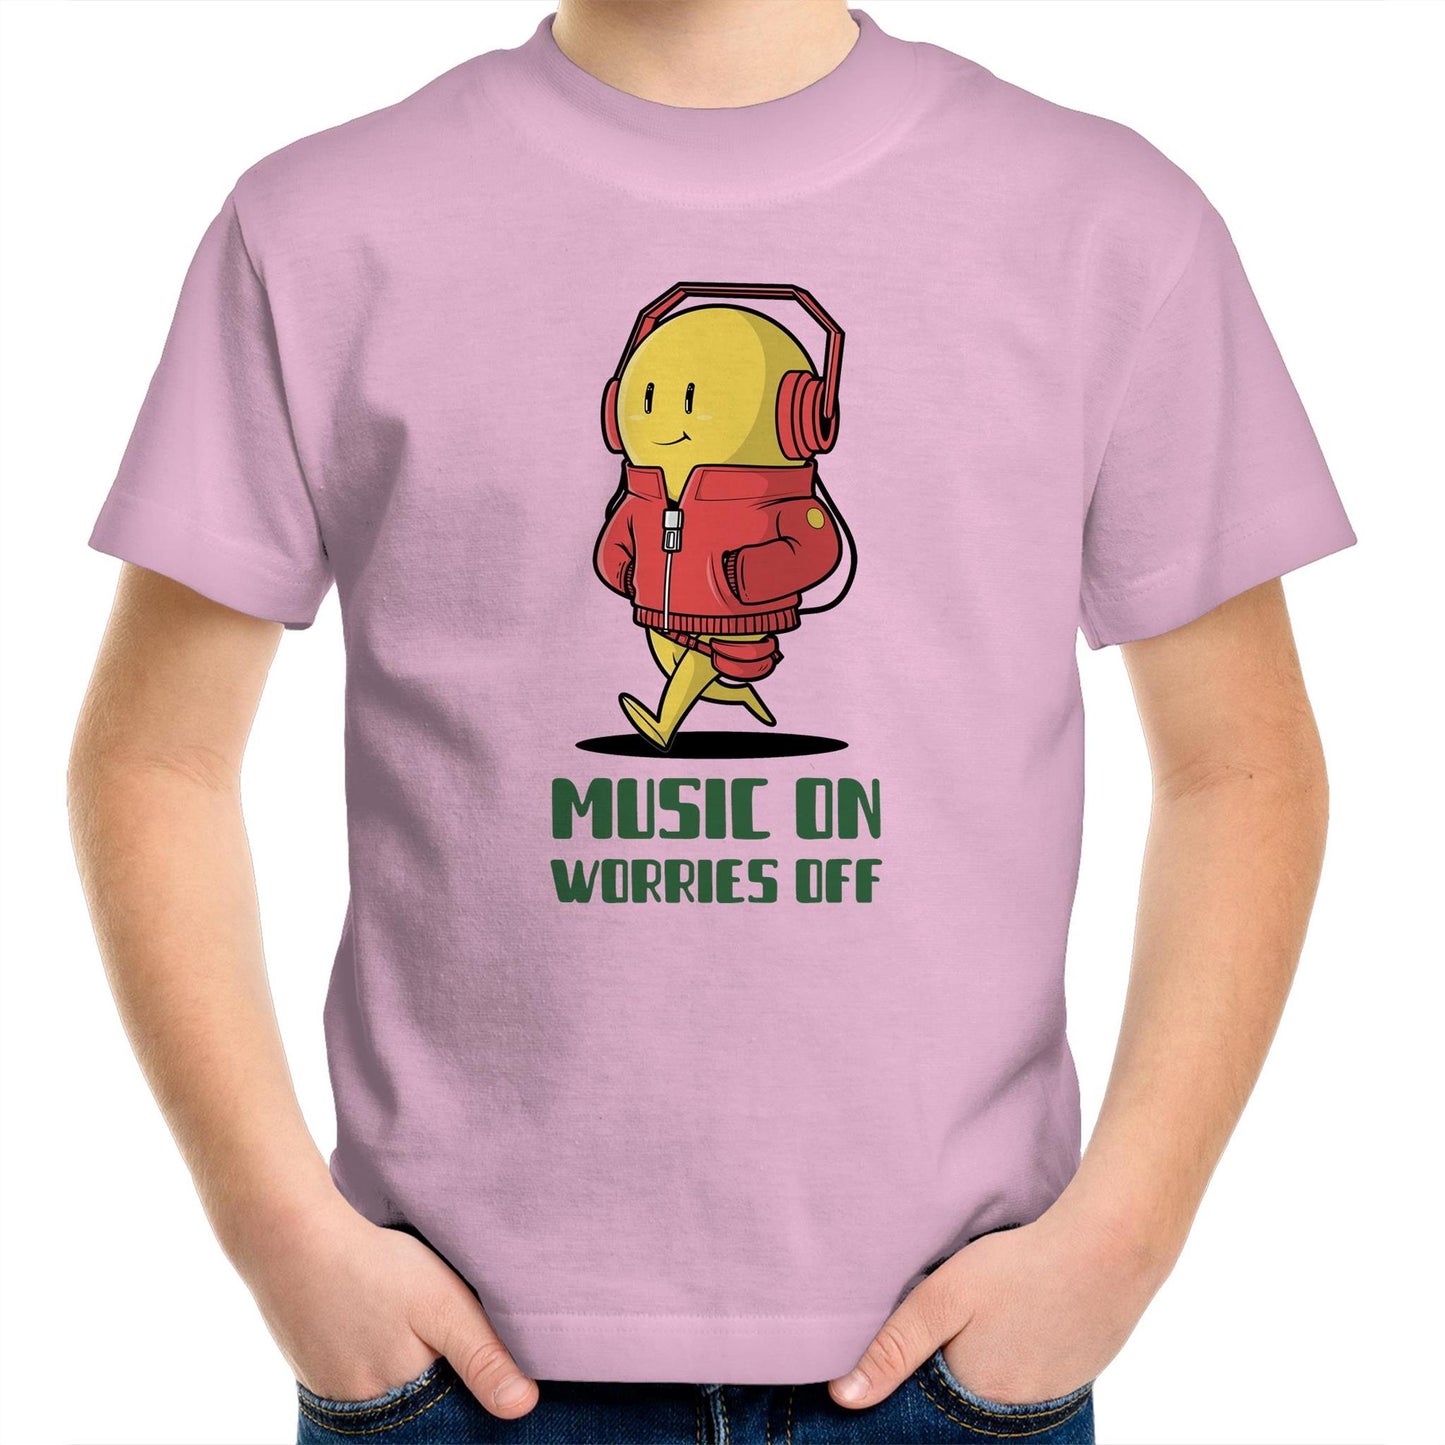 Music On, Worries Off - Kids Youth T-Shirt Pink Kids Youth T-shirt Music